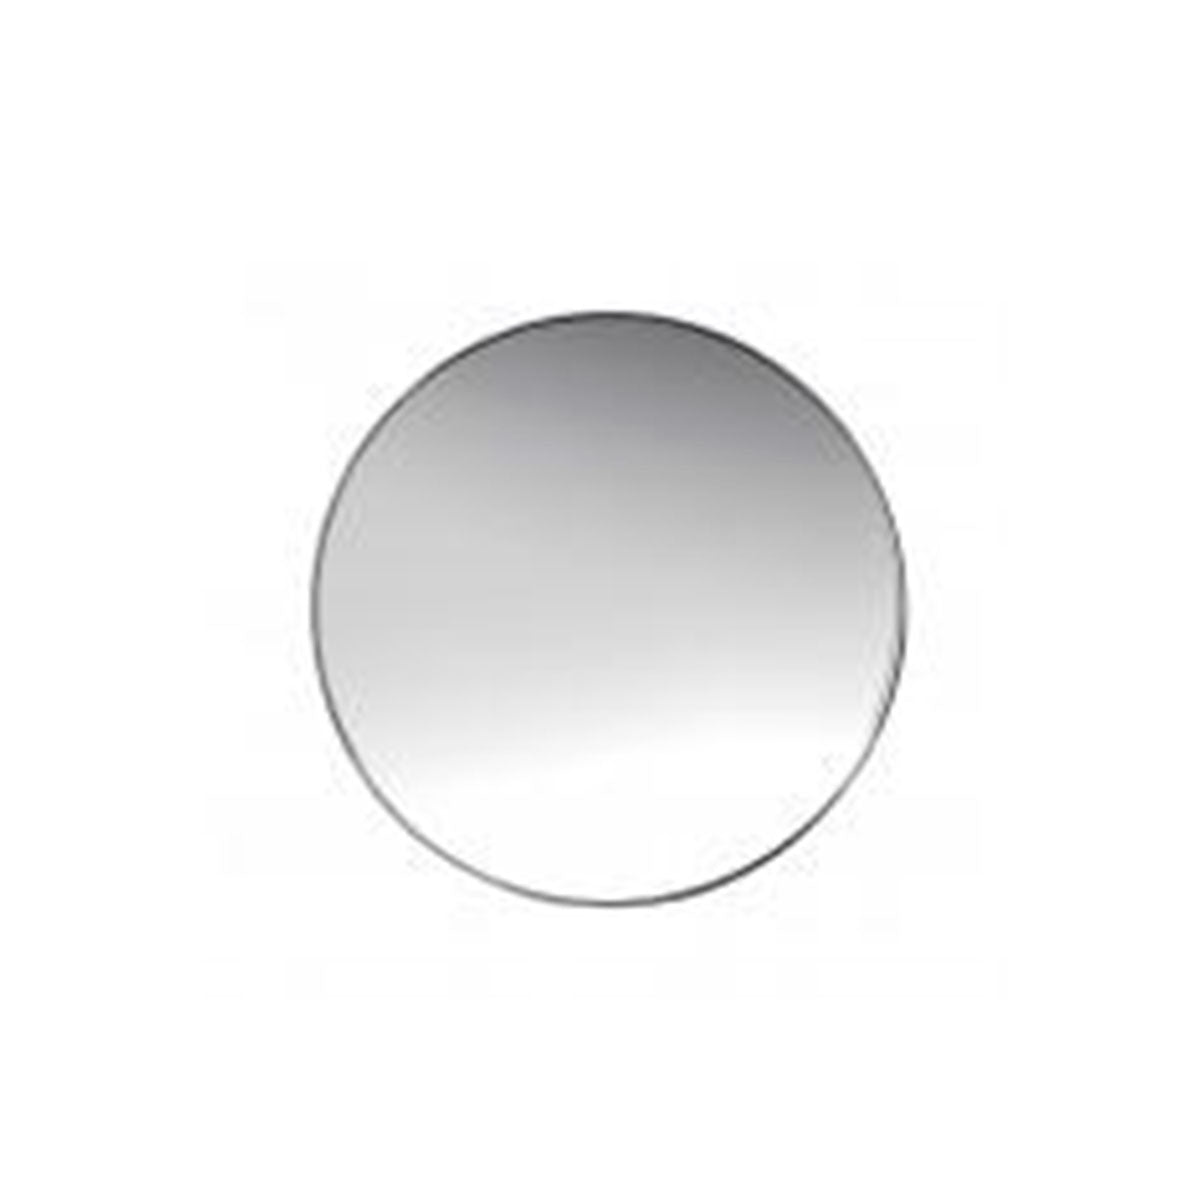 10x detail mirror, brushed stainless steel - main image